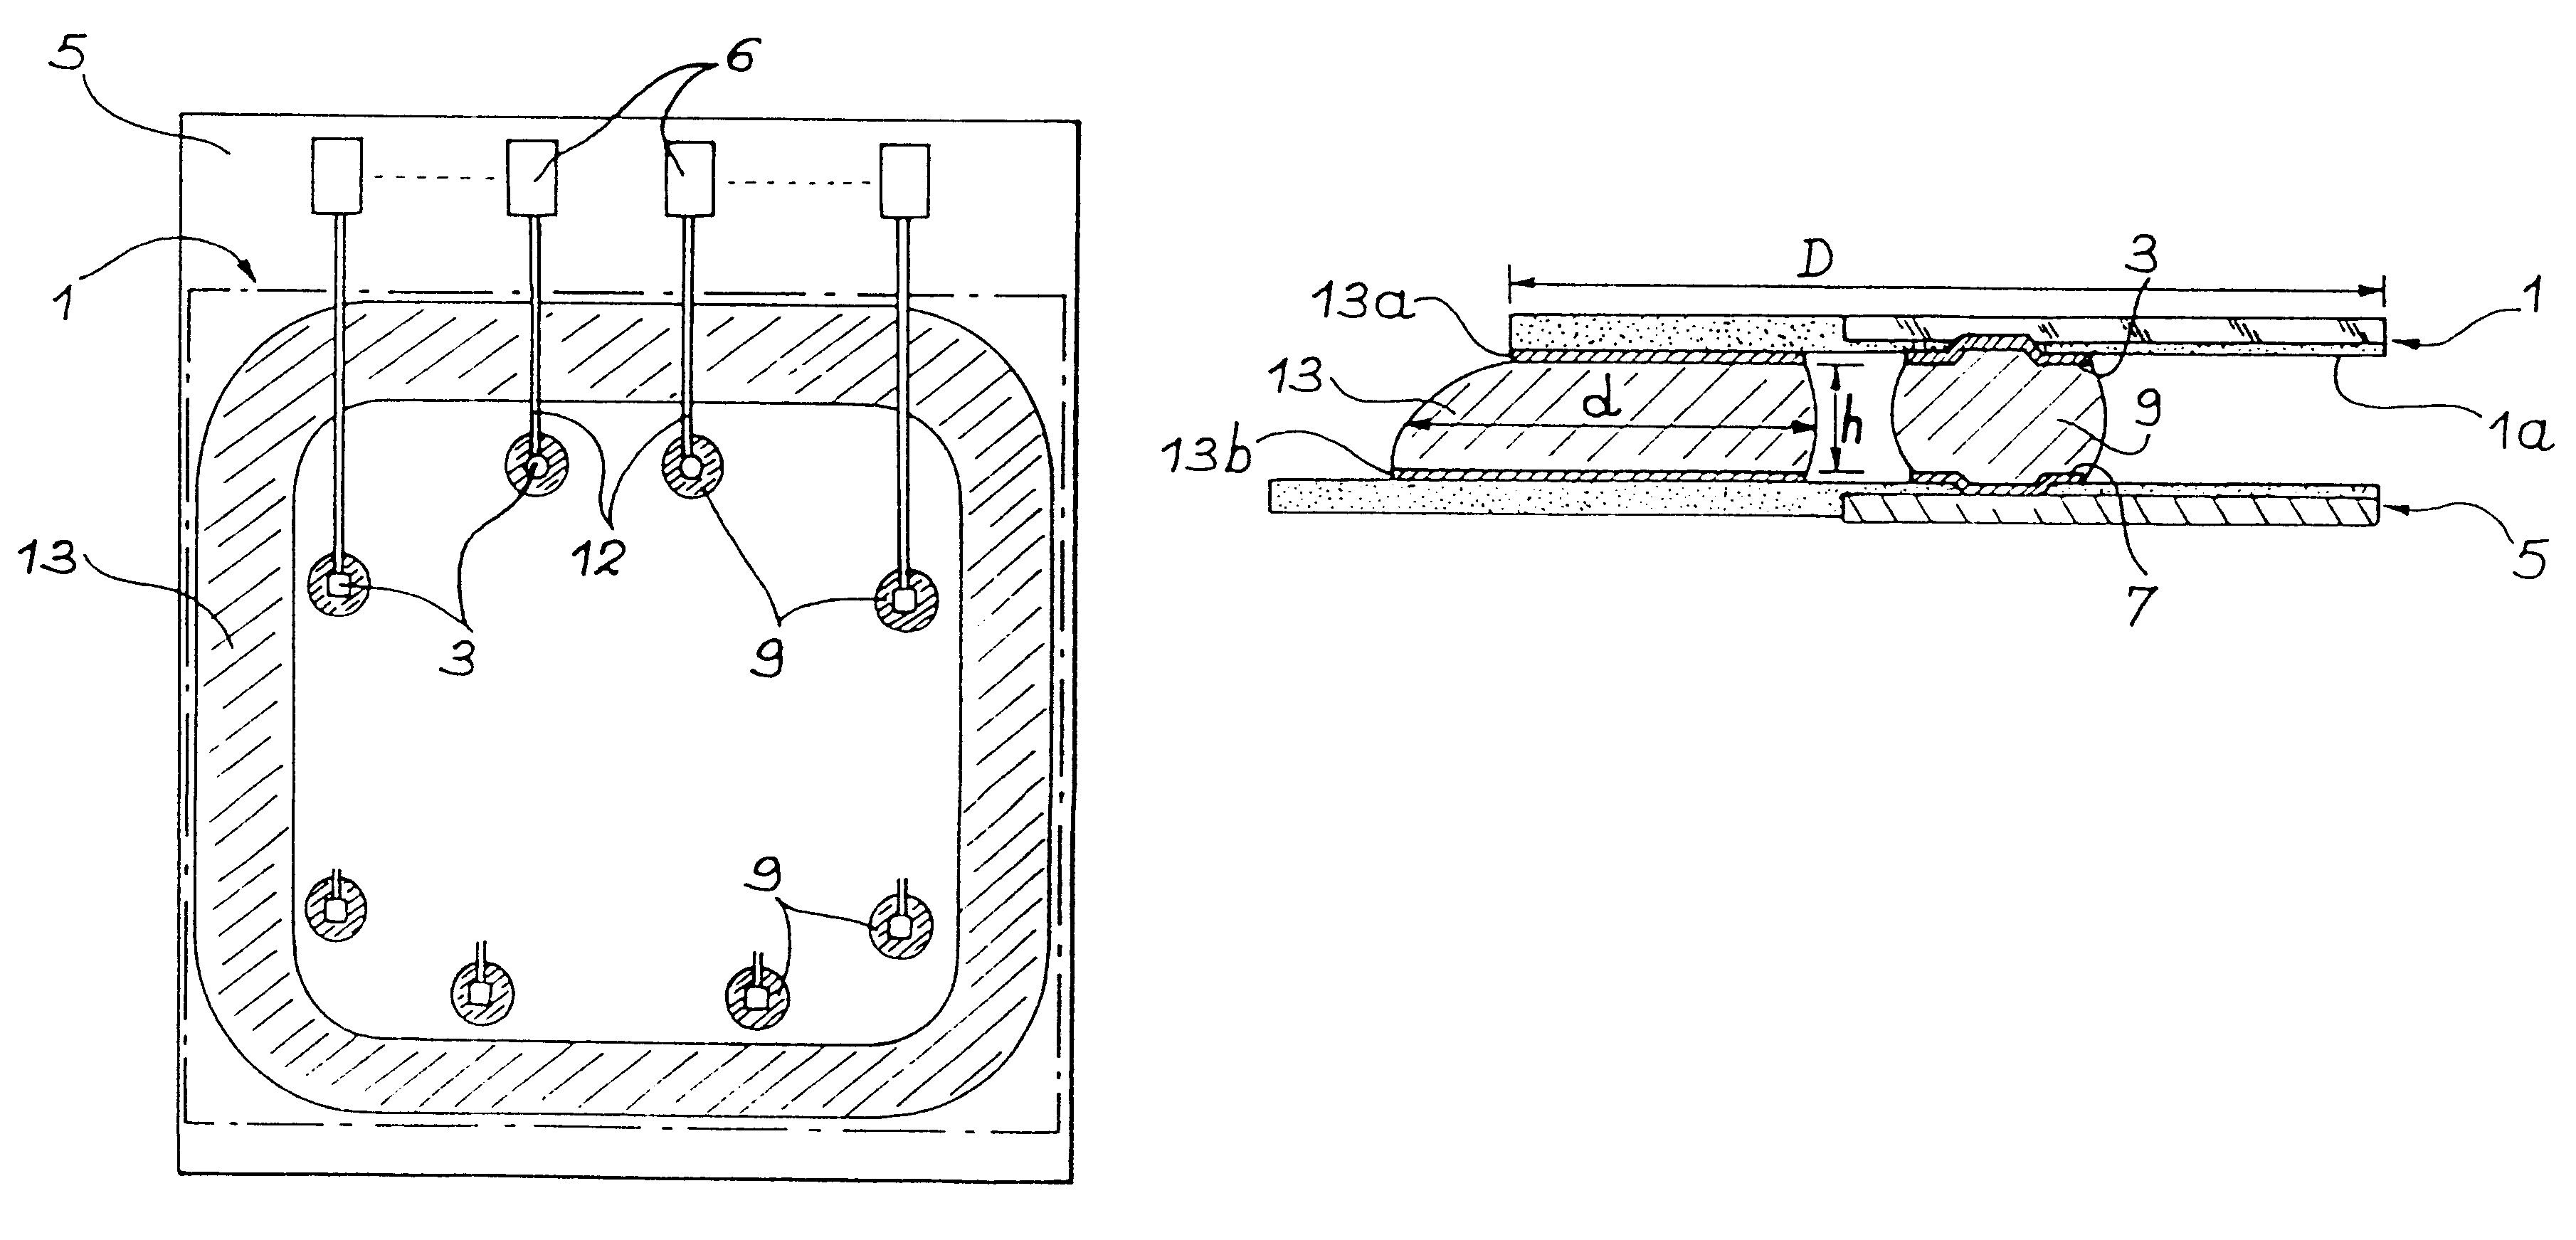 Process for producing a sealing and mechanical strength ring between a substrate and a chip hybridized by bumps on the substrate